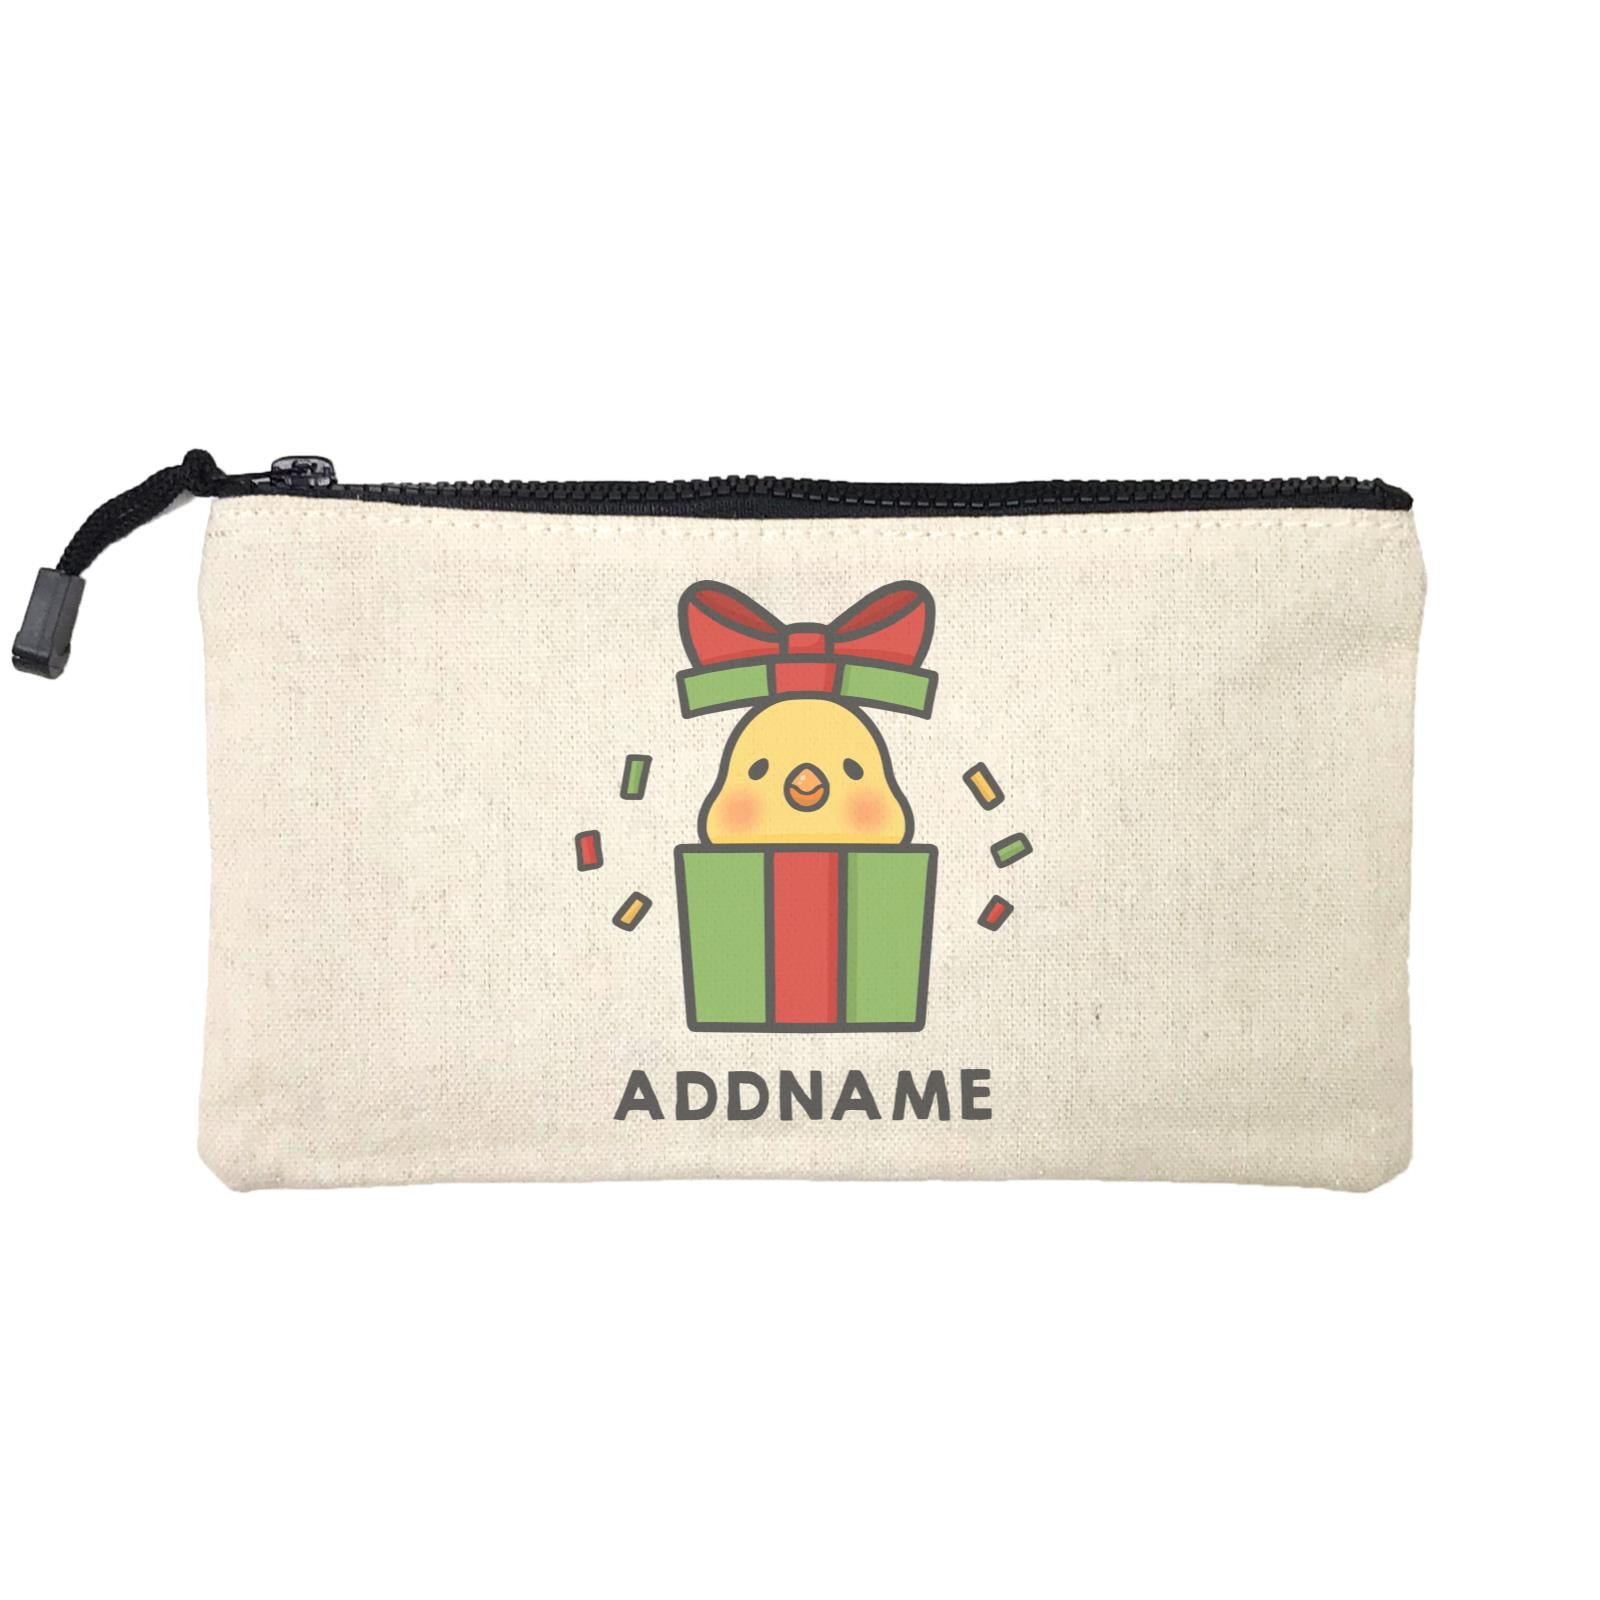 Xmas Cute Chick In Gift Box Addname Mini Accessories Stationery Pouch